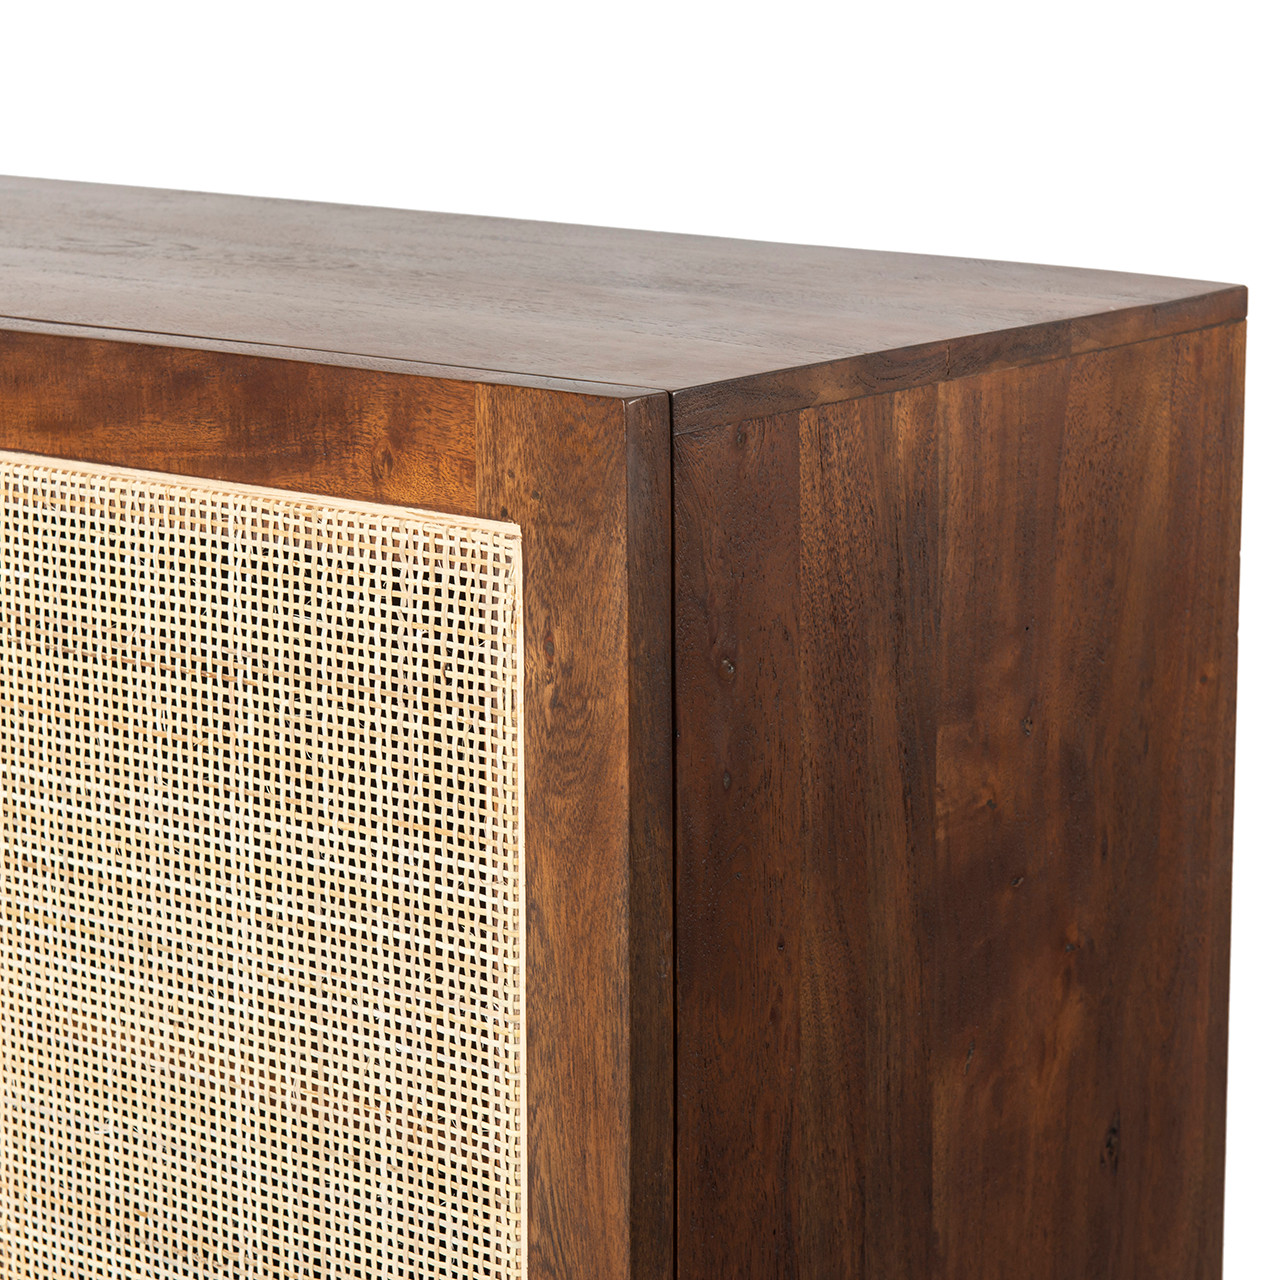 Goldie Cane Sideboard - Toasted Acacia